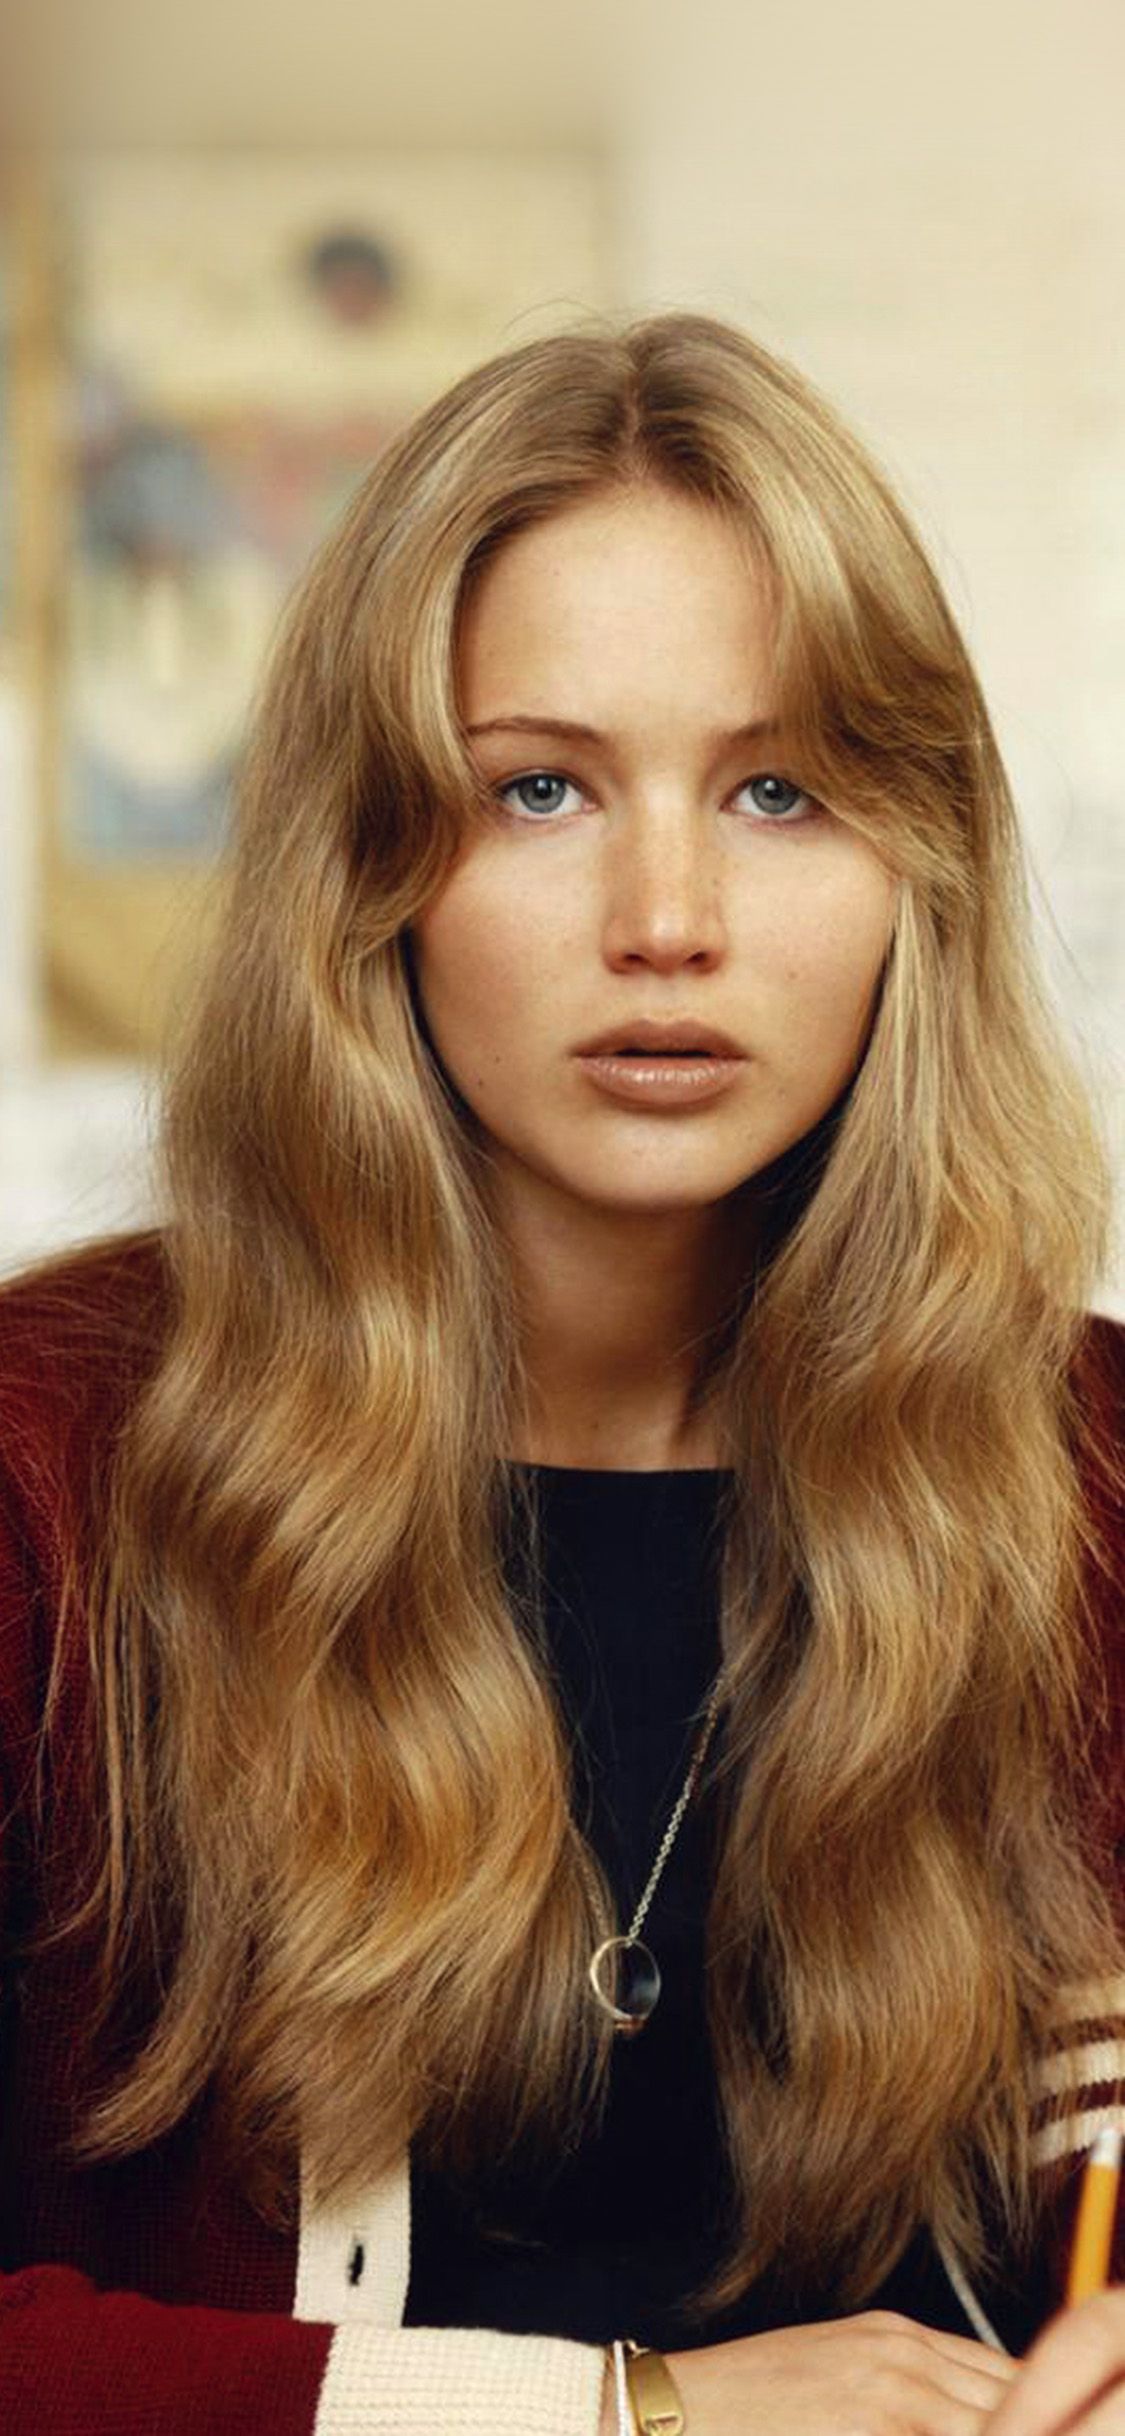 Jennifer Lawrence with long blonde hair and bangs, wearing a black shirt and a red cardigan. - Jennifer Lawrence